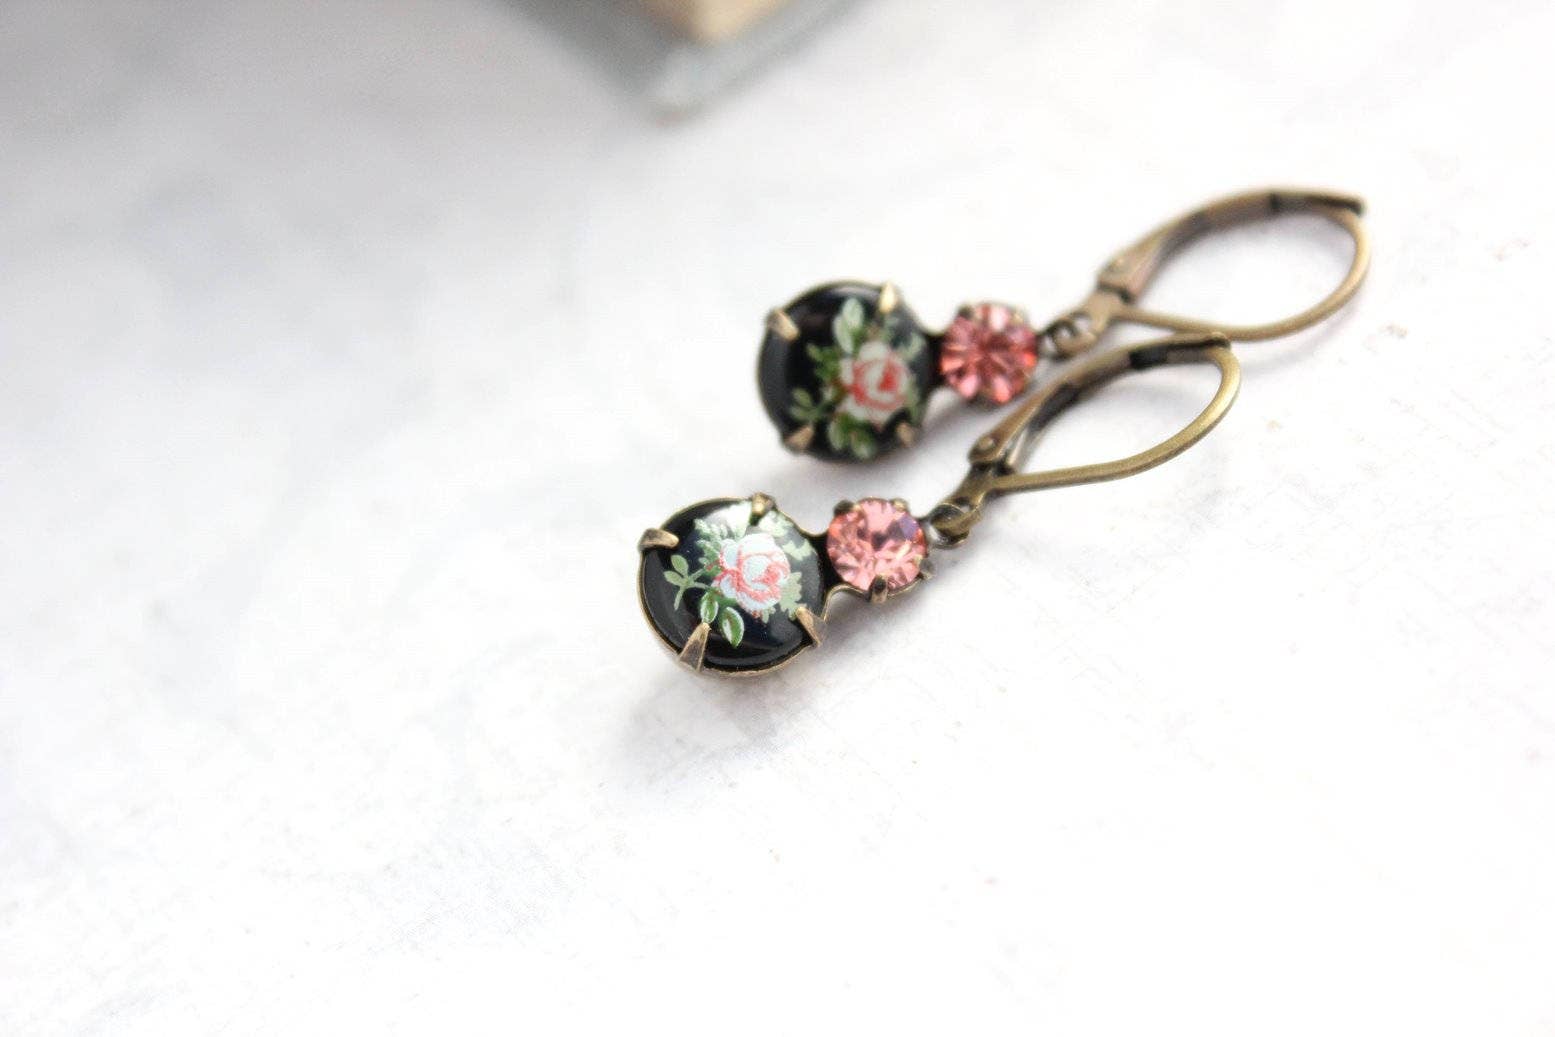 Little Cameo Earrings - Vintage Glass  - Pink Rose on Black - Out of the Blue